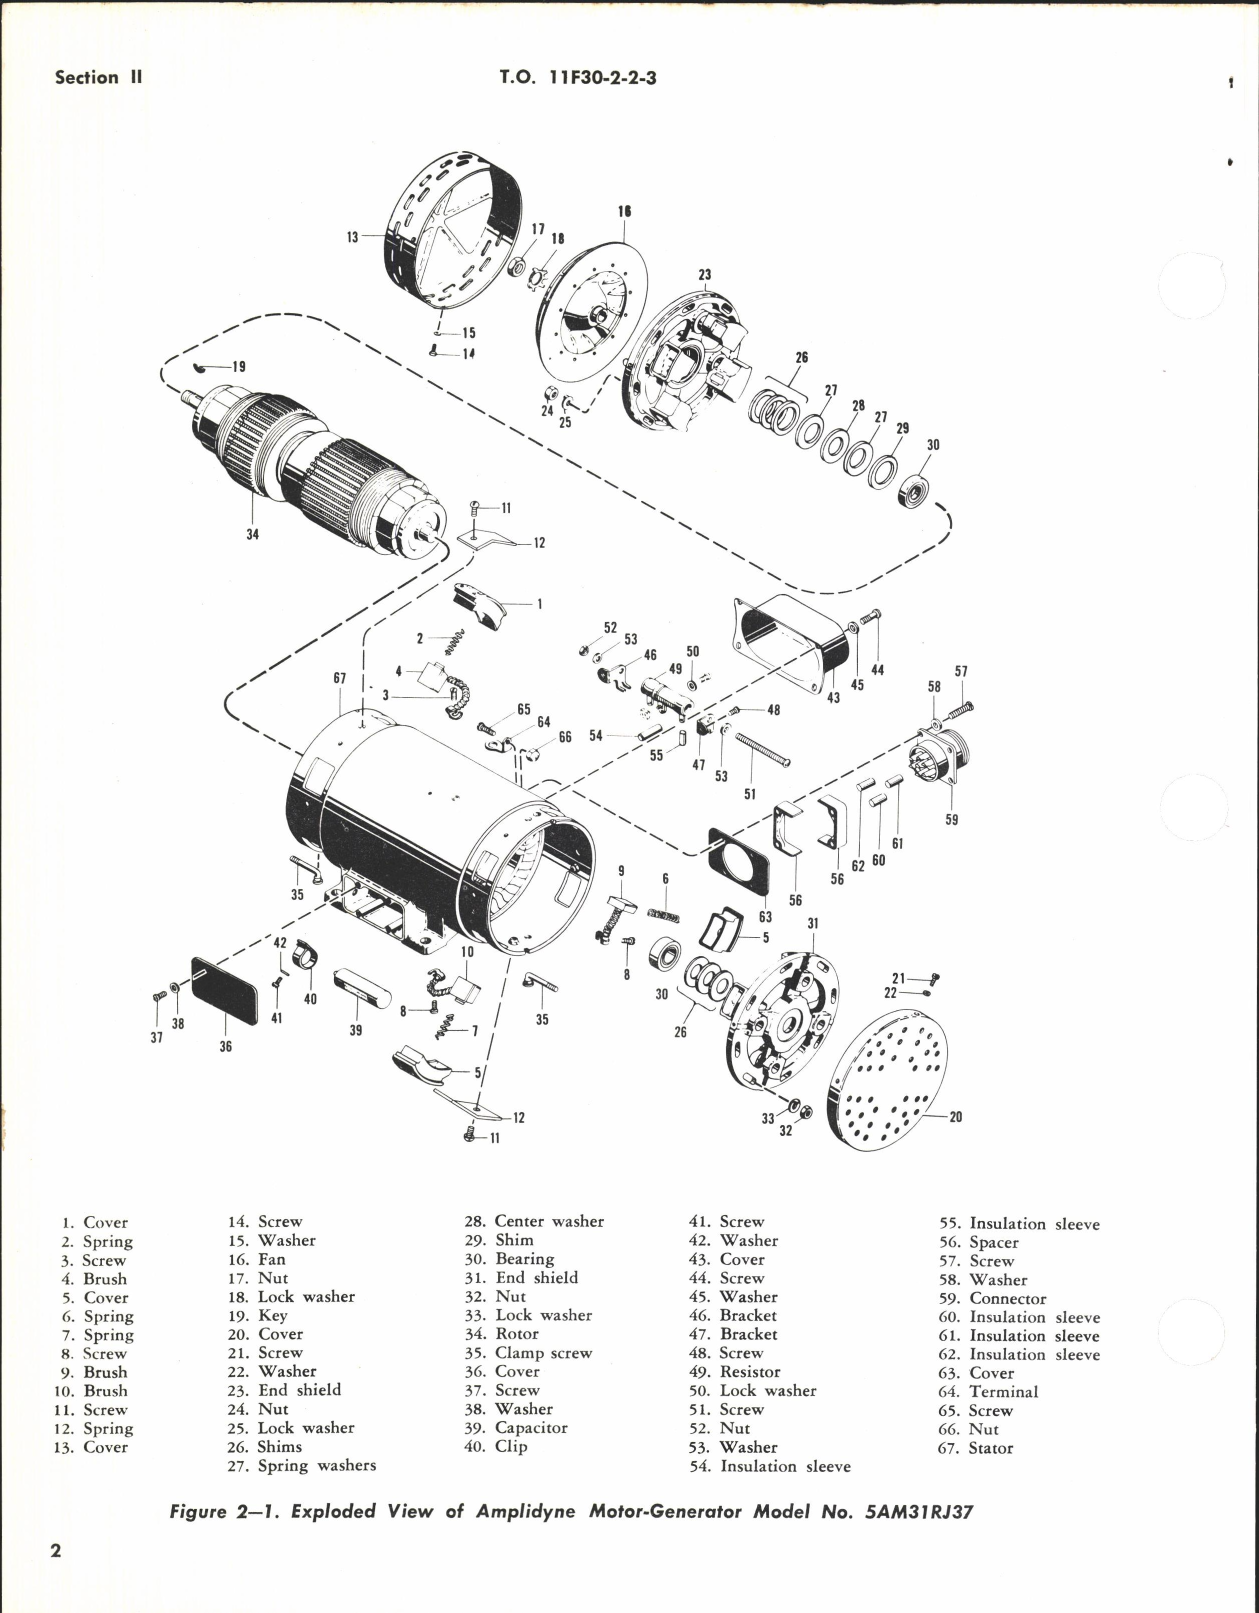 Sample page 6 from AirCorps Library document: Overhaul Instructions for Amplidyne Motor-Generator Model Nos. 5AM31RJ37 and 5AM31RJ55